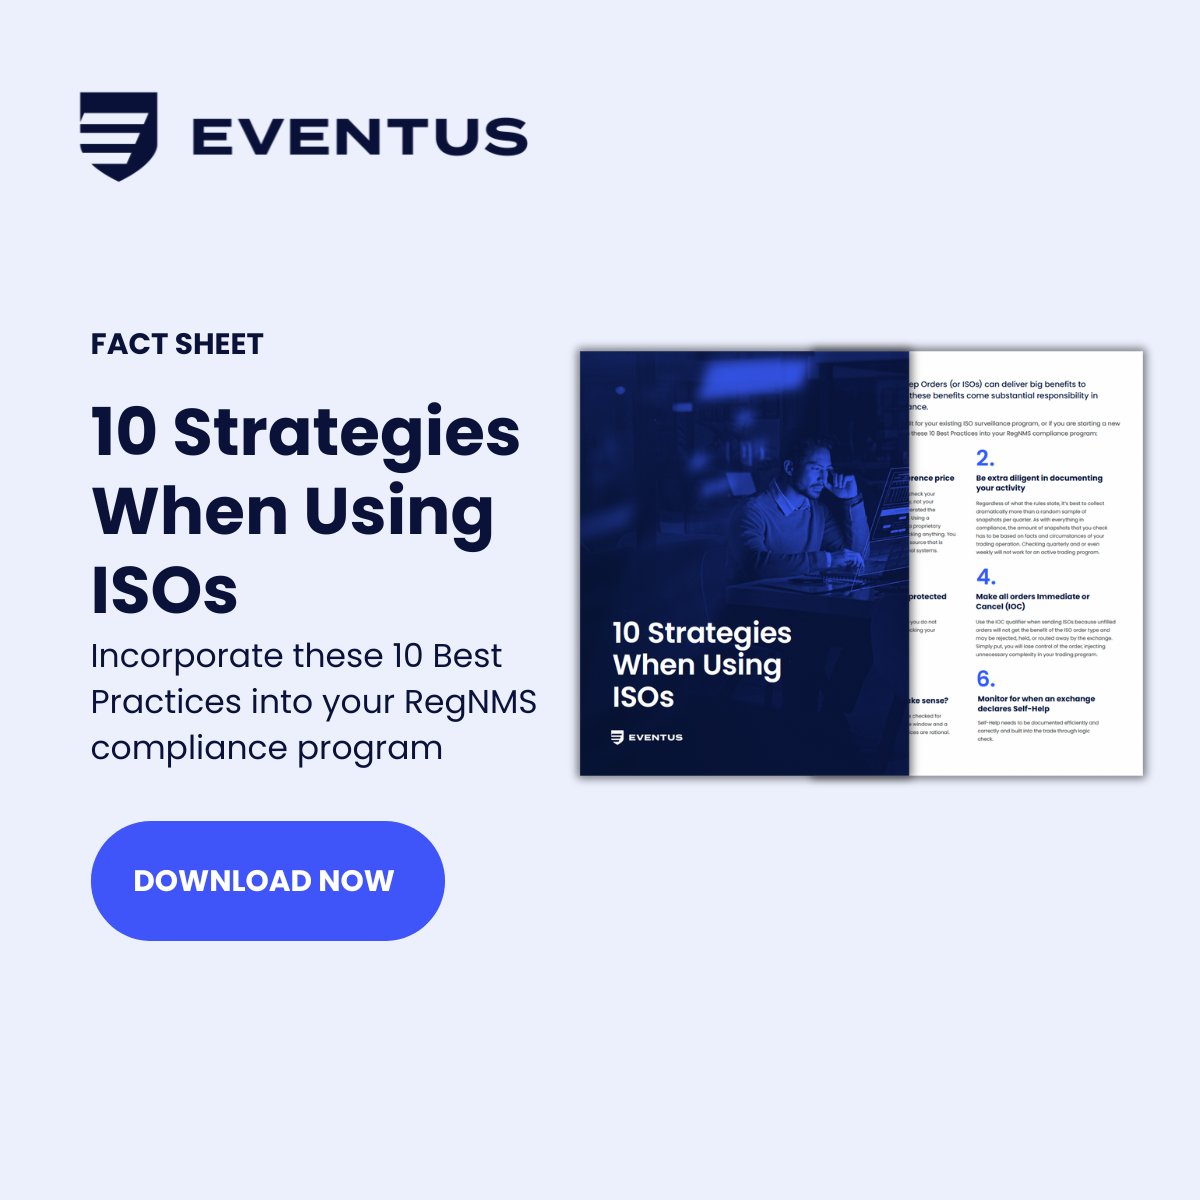 Are you auditing your existing #ISO surveillance program? Or starting a new one? If so download our '10 Strategies When Using ISOs' document to explore the best practices you can incorporate into your RegNMS compliance program. Download now 👉 hubs.ly/Q02n98ts0 #Compliance